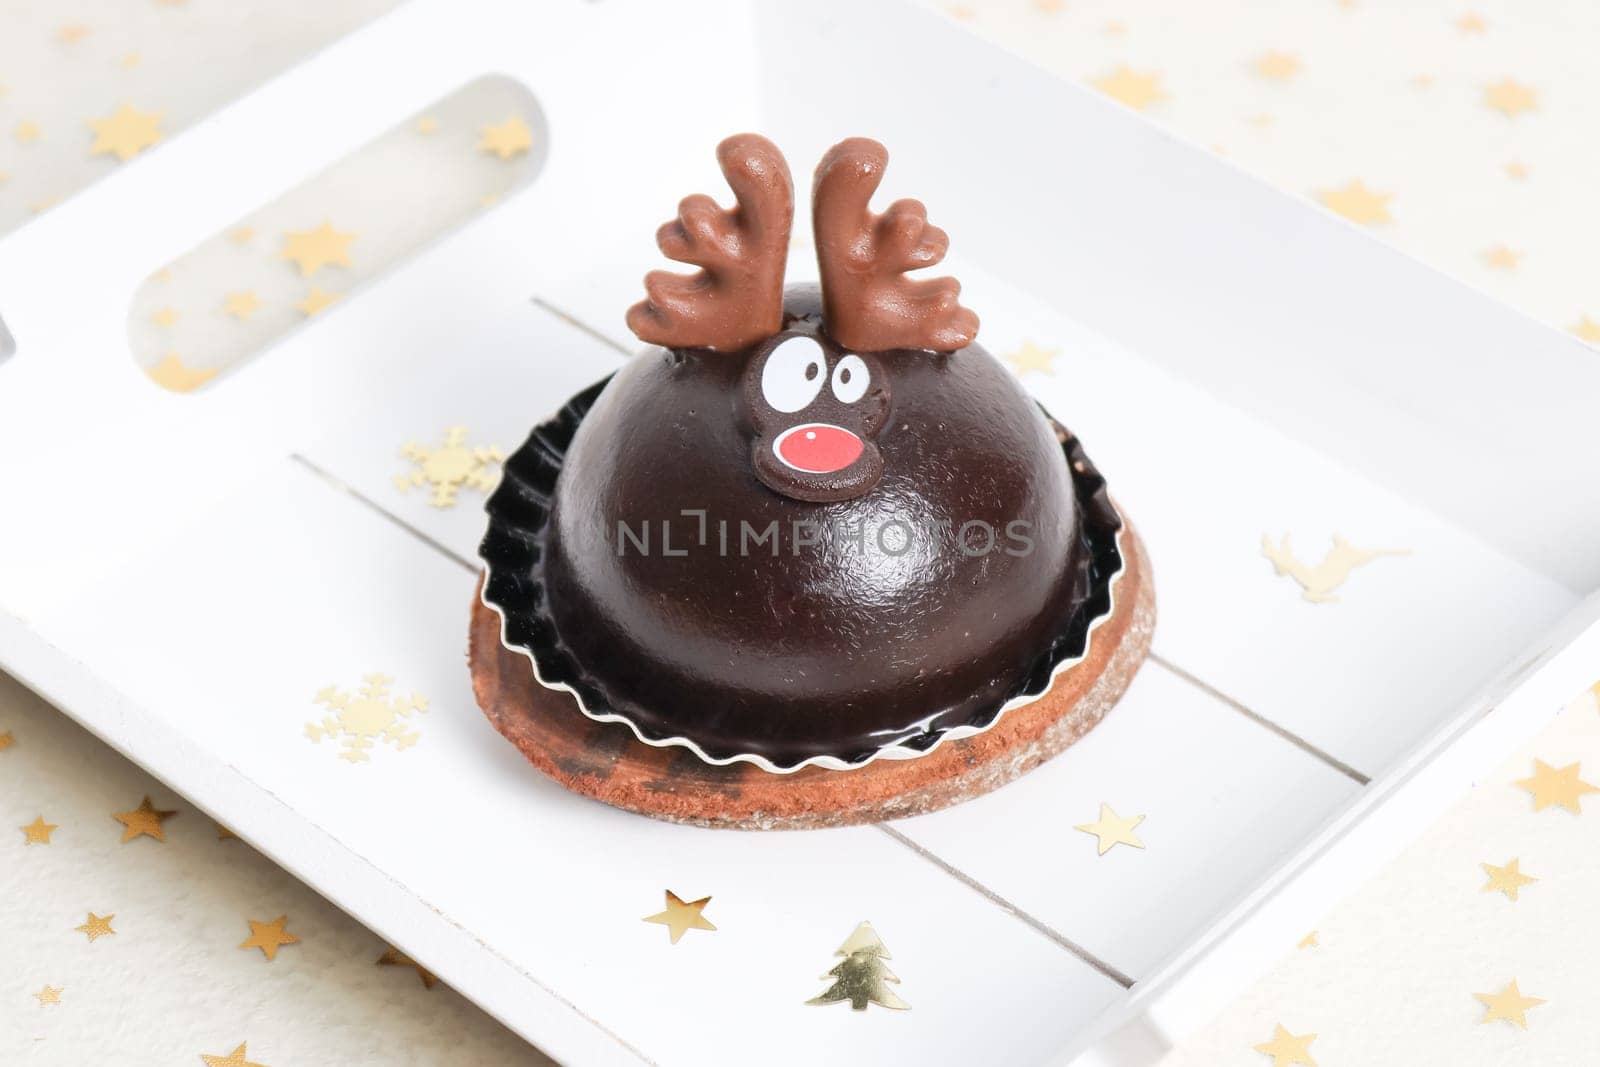 One chocolate deer cake in a white wooden tray on the table, side view close-up.